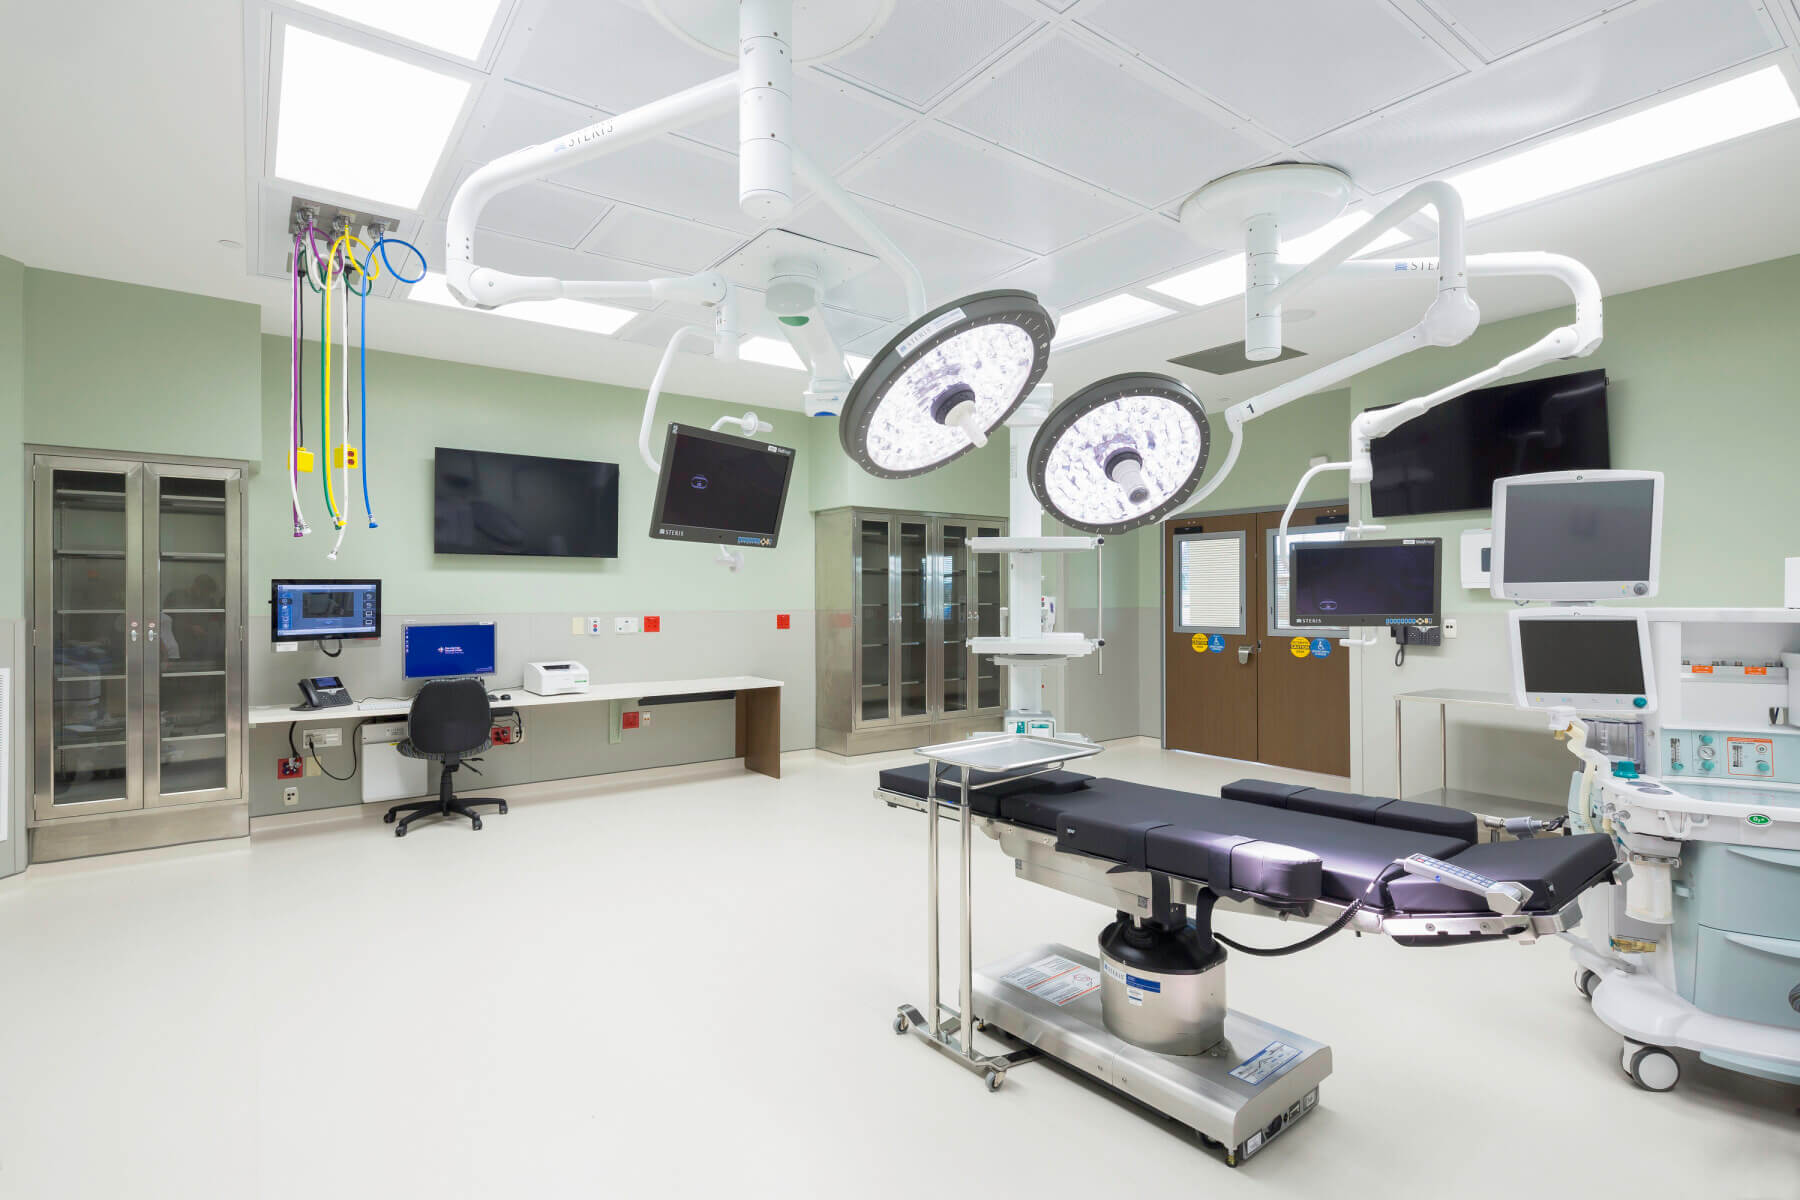 unoccupied procedural room with large medical device coming from the ceiling